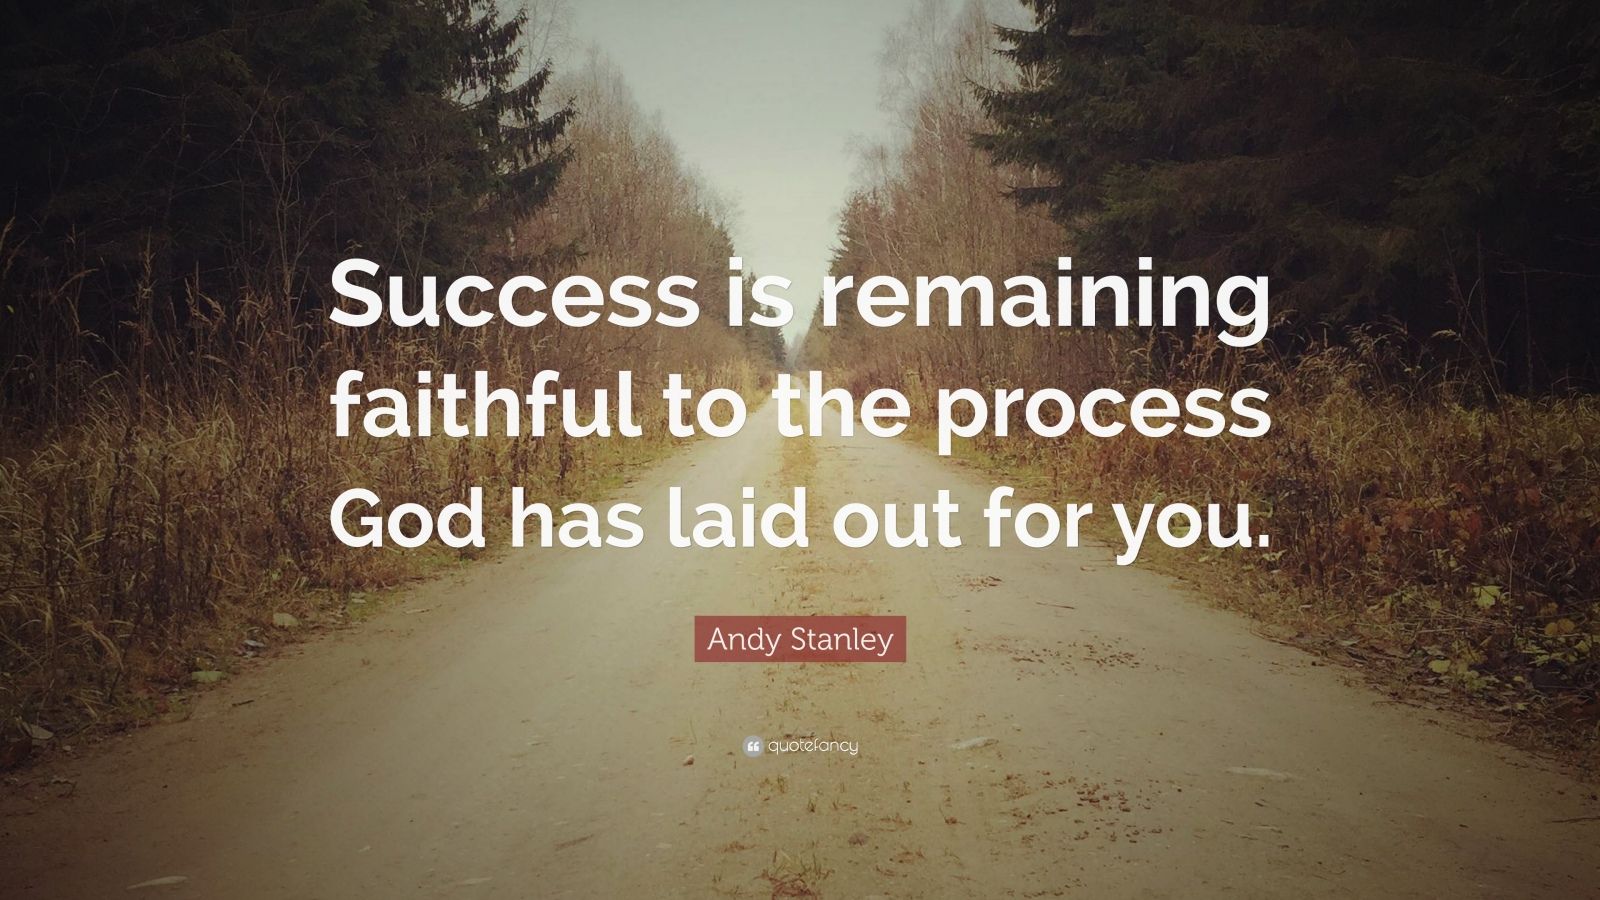 Andy Stanley Quote: “Success is remaining faithful to the process God